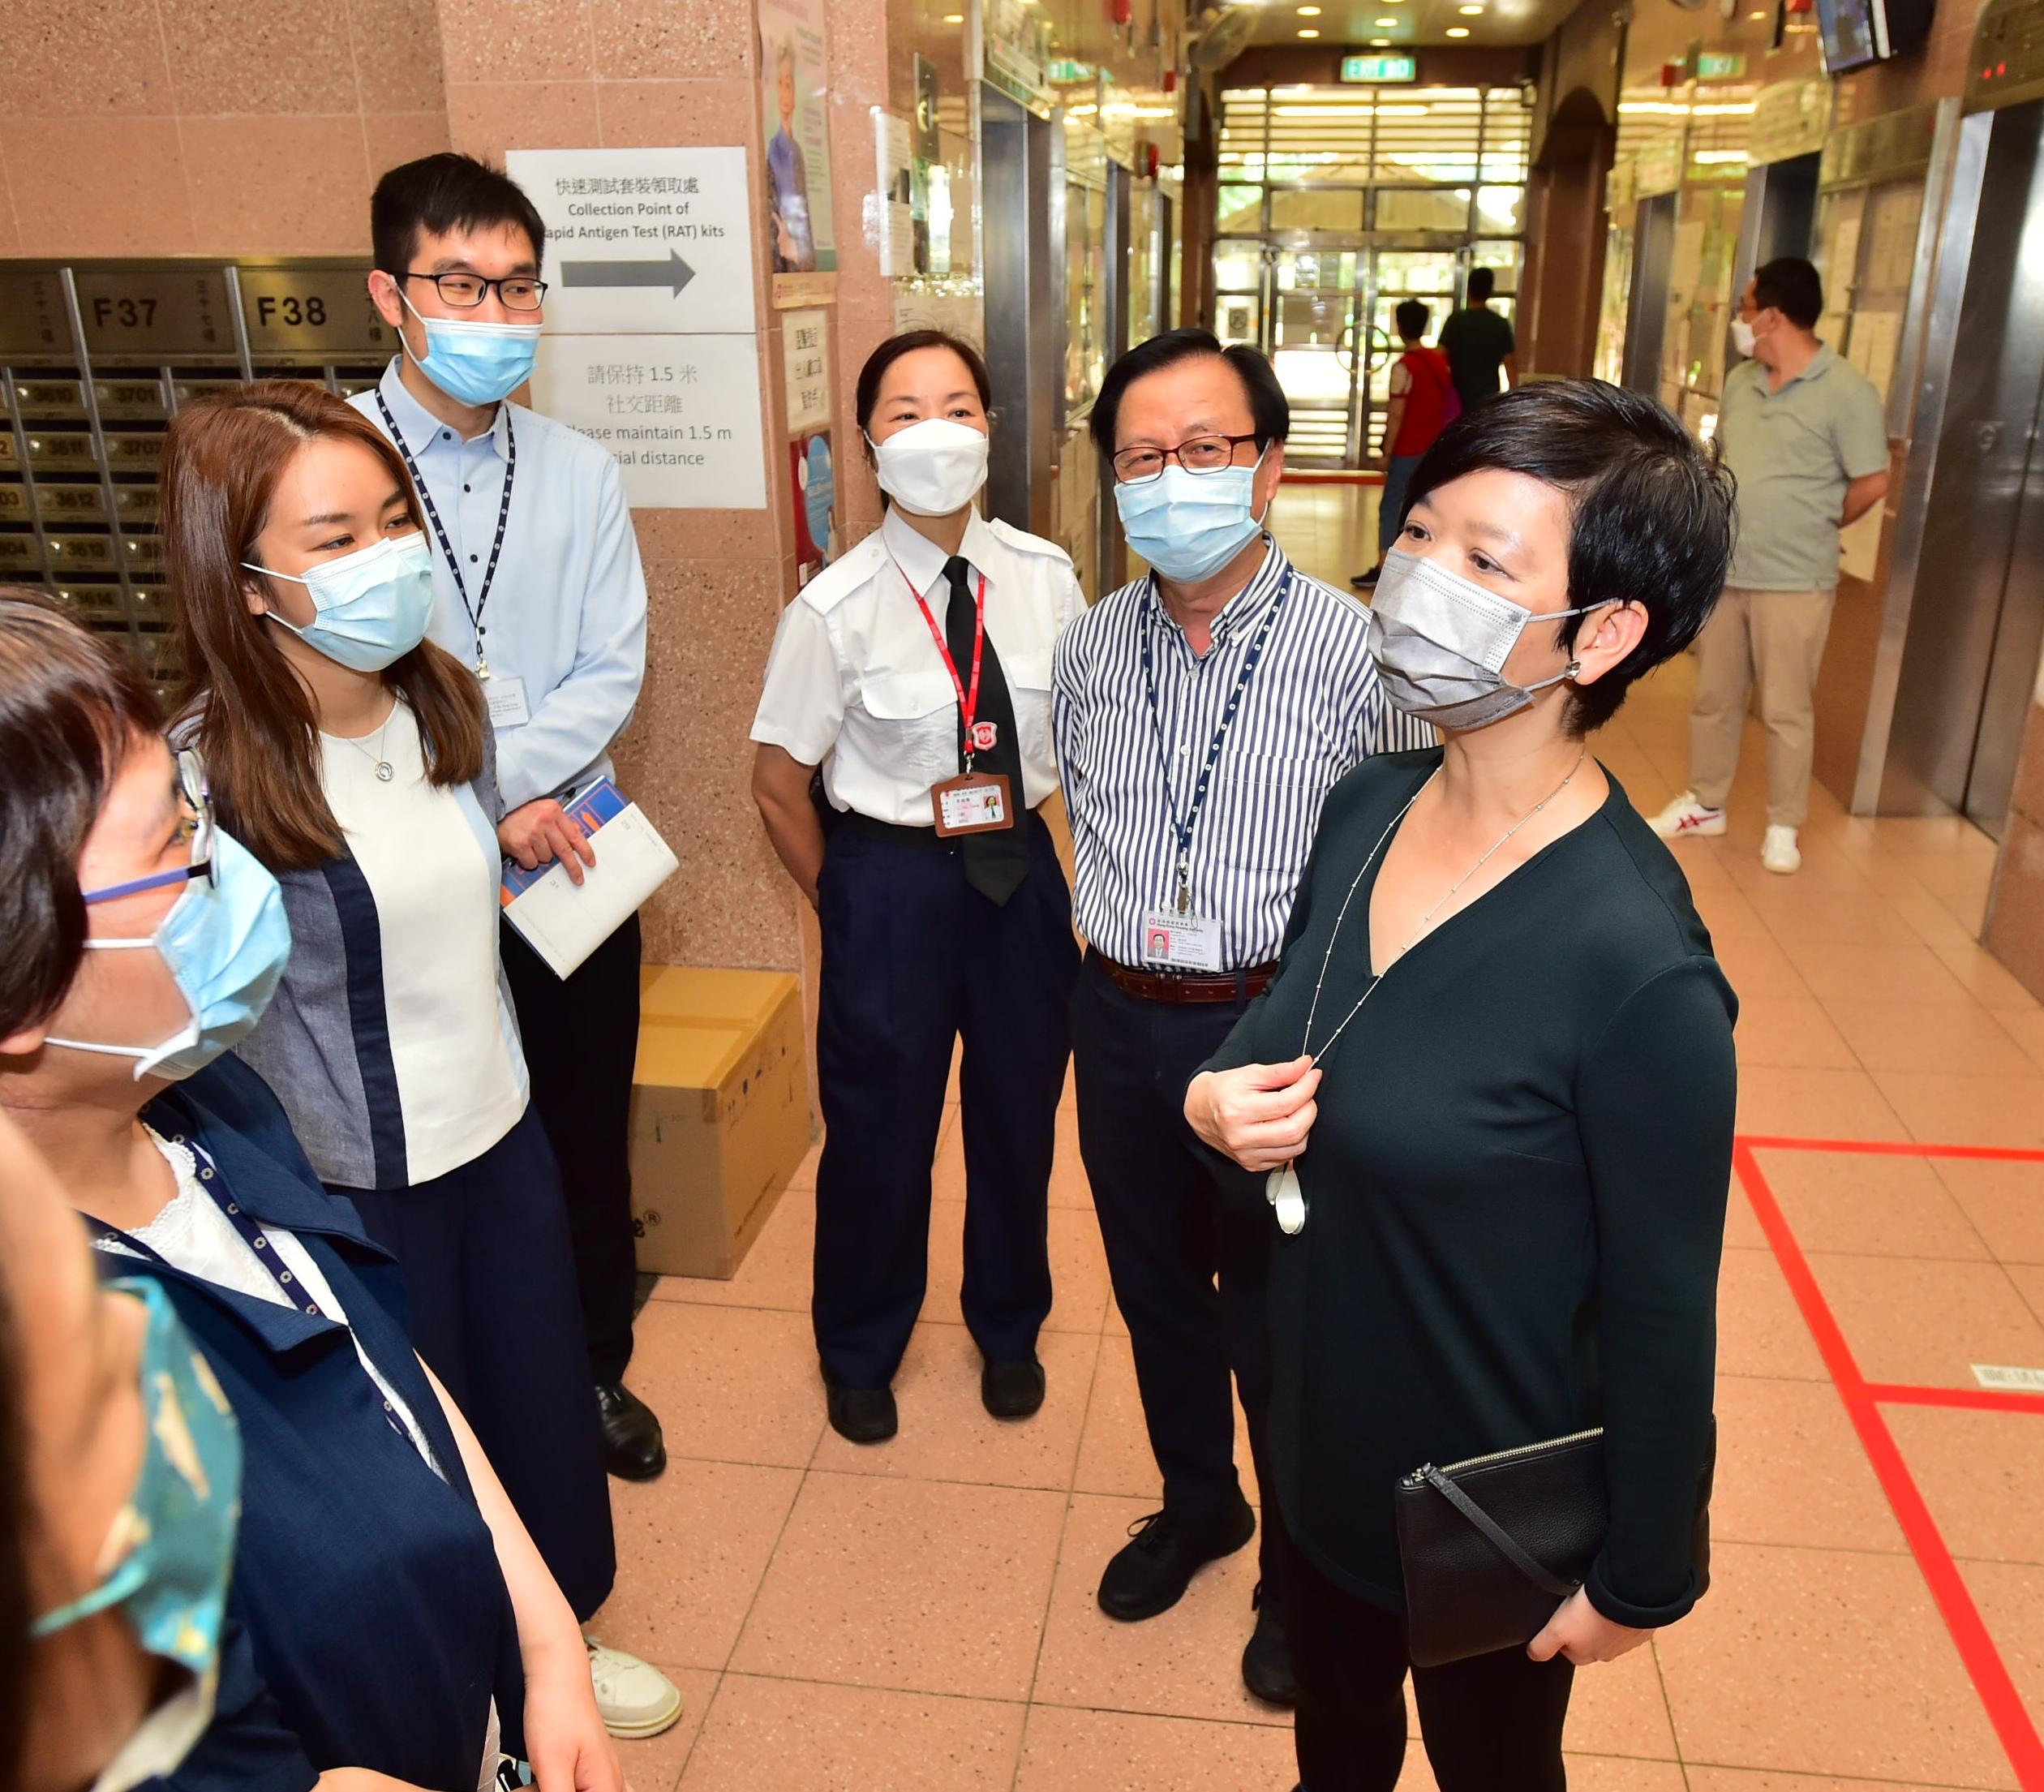 The Secretary for Housing, Ms Winnie Ho, visited Tsz Ching Estate in Tsz Wan Shan this afternoon (July 7) to learn about the distribution arrangements of COVID-19 rapid antigen test (RAT) kits in public rental housing estates by the Housing Department. Photo shows Ms Ho (first right) being briefed by Tsz Ching Estate staff on the arrangement and workflow of the distribution of the RAT kits.